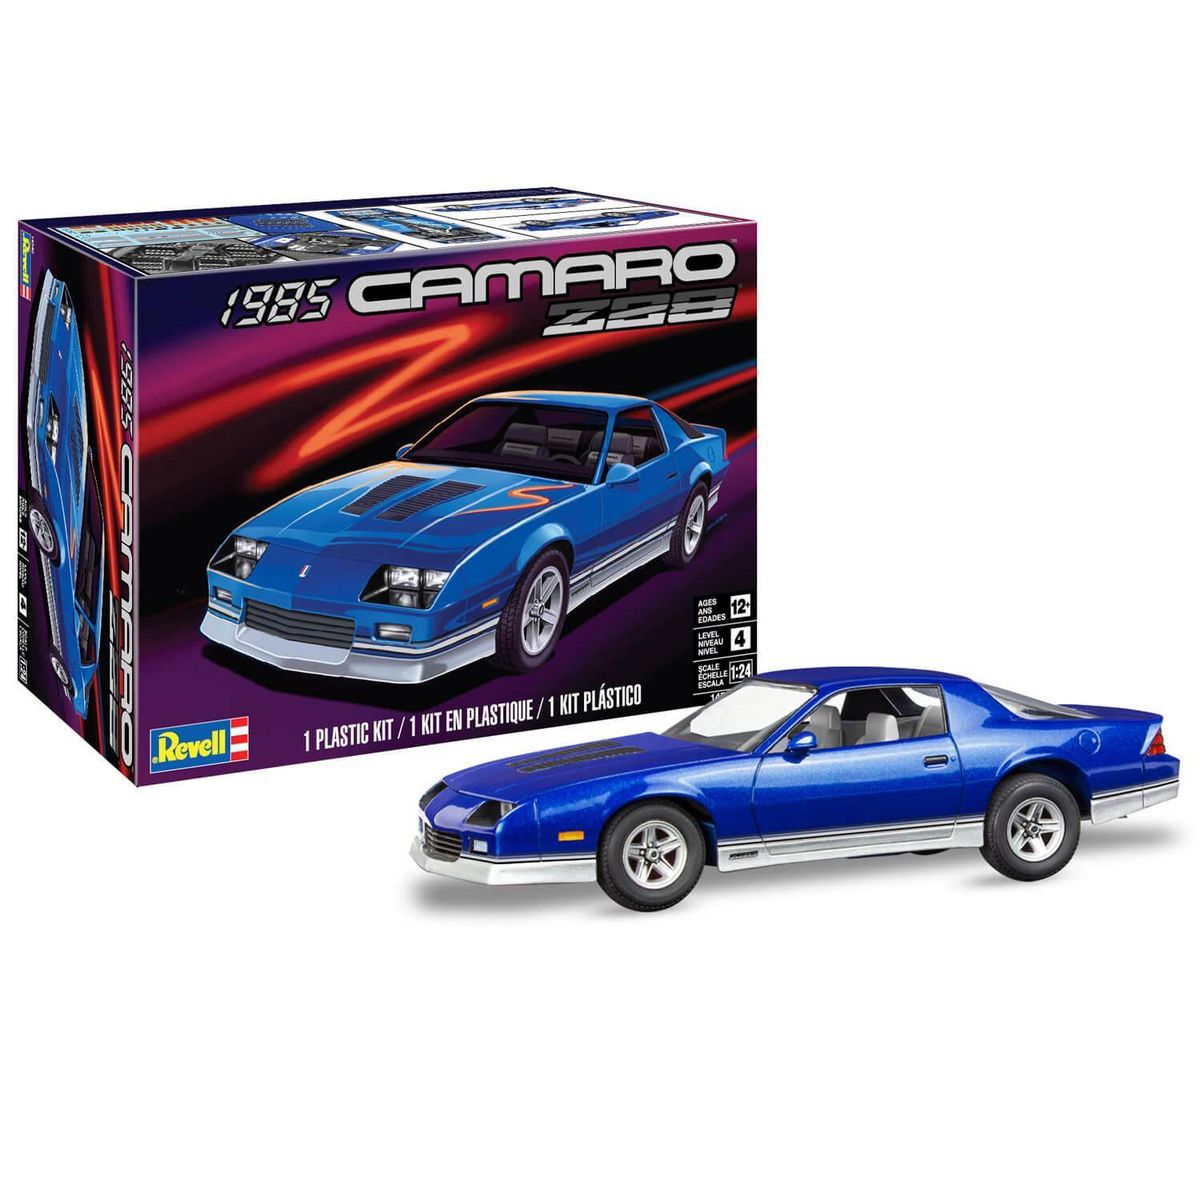 Revell Maquette voiture : 1985 Chevy Camaro Z28